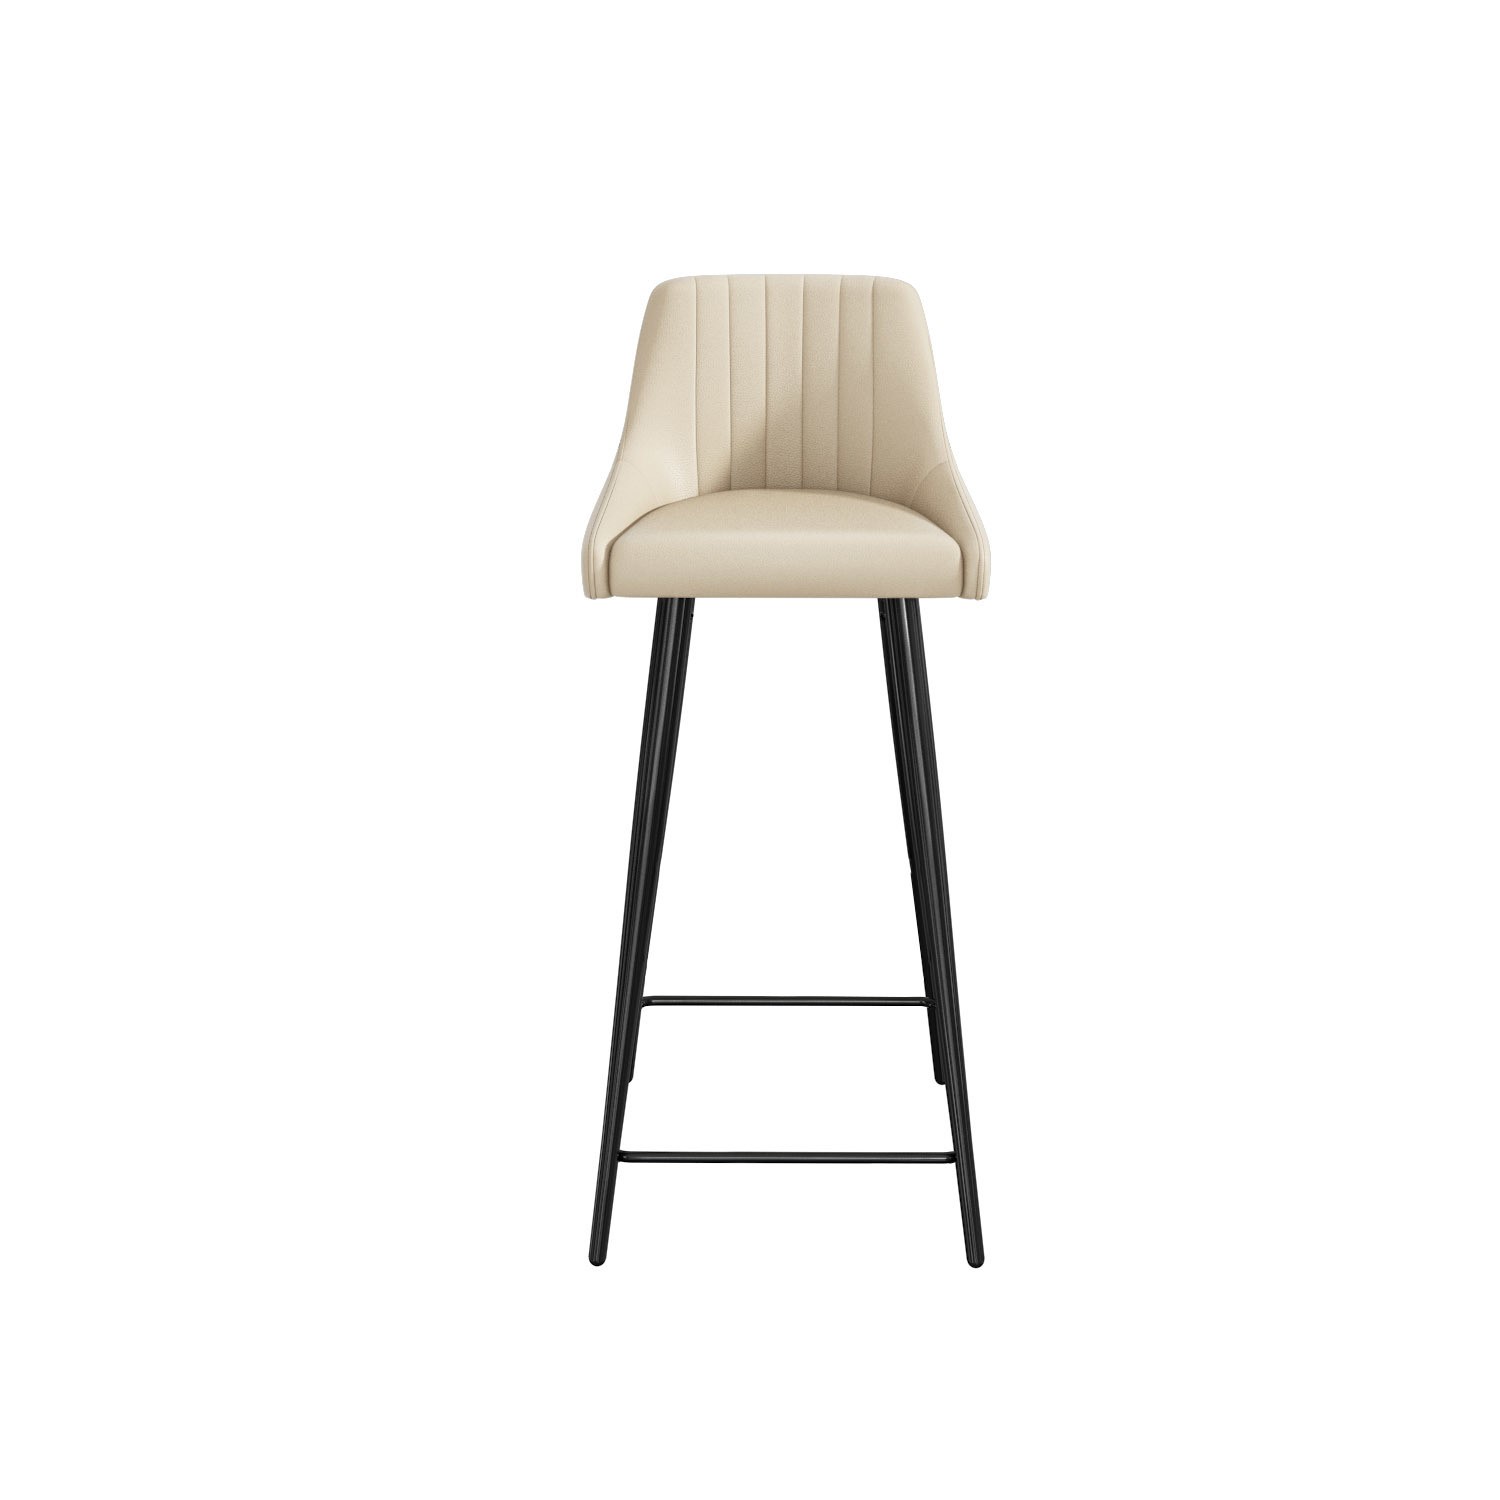 Cream Faux Leather Bar Stool With Back, Faux Leather Bar Stools With Backs Uk